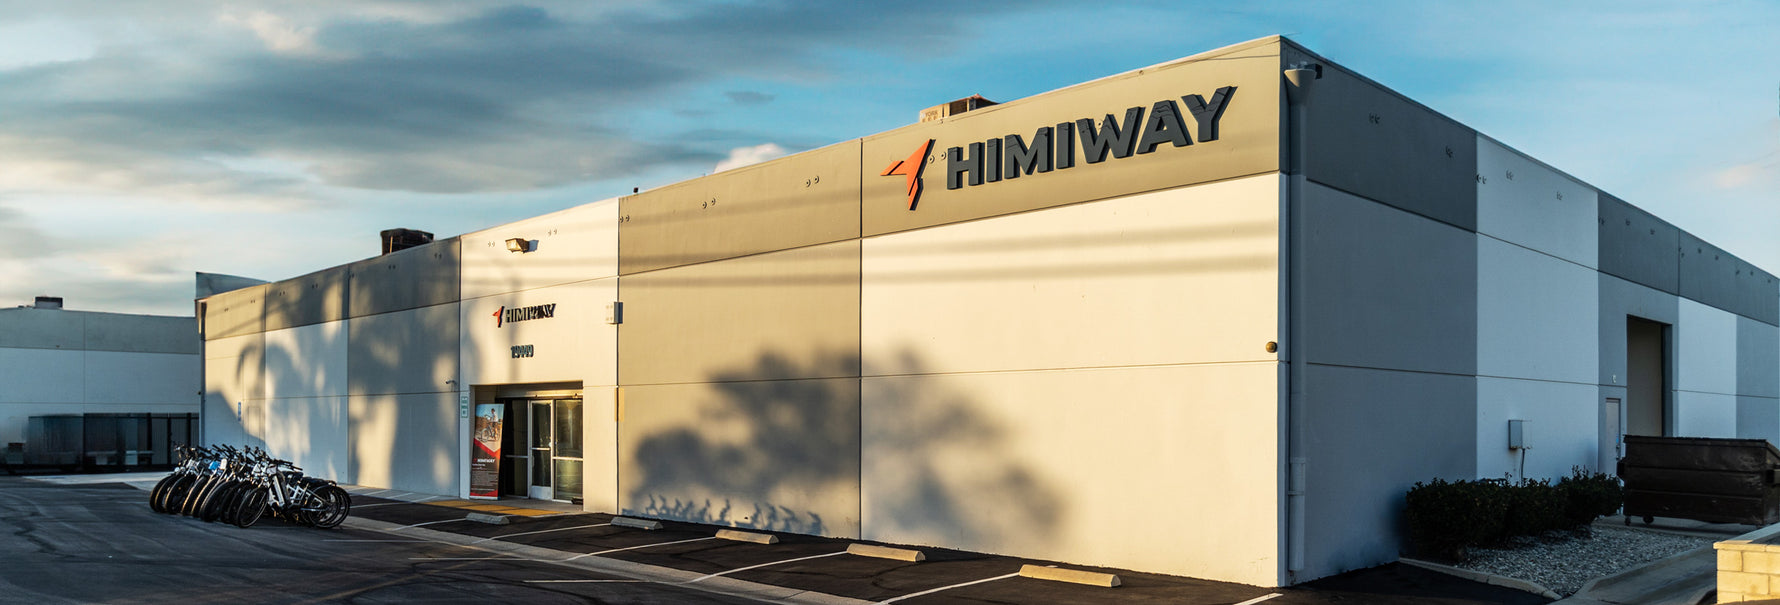 Himiway USA Service Center